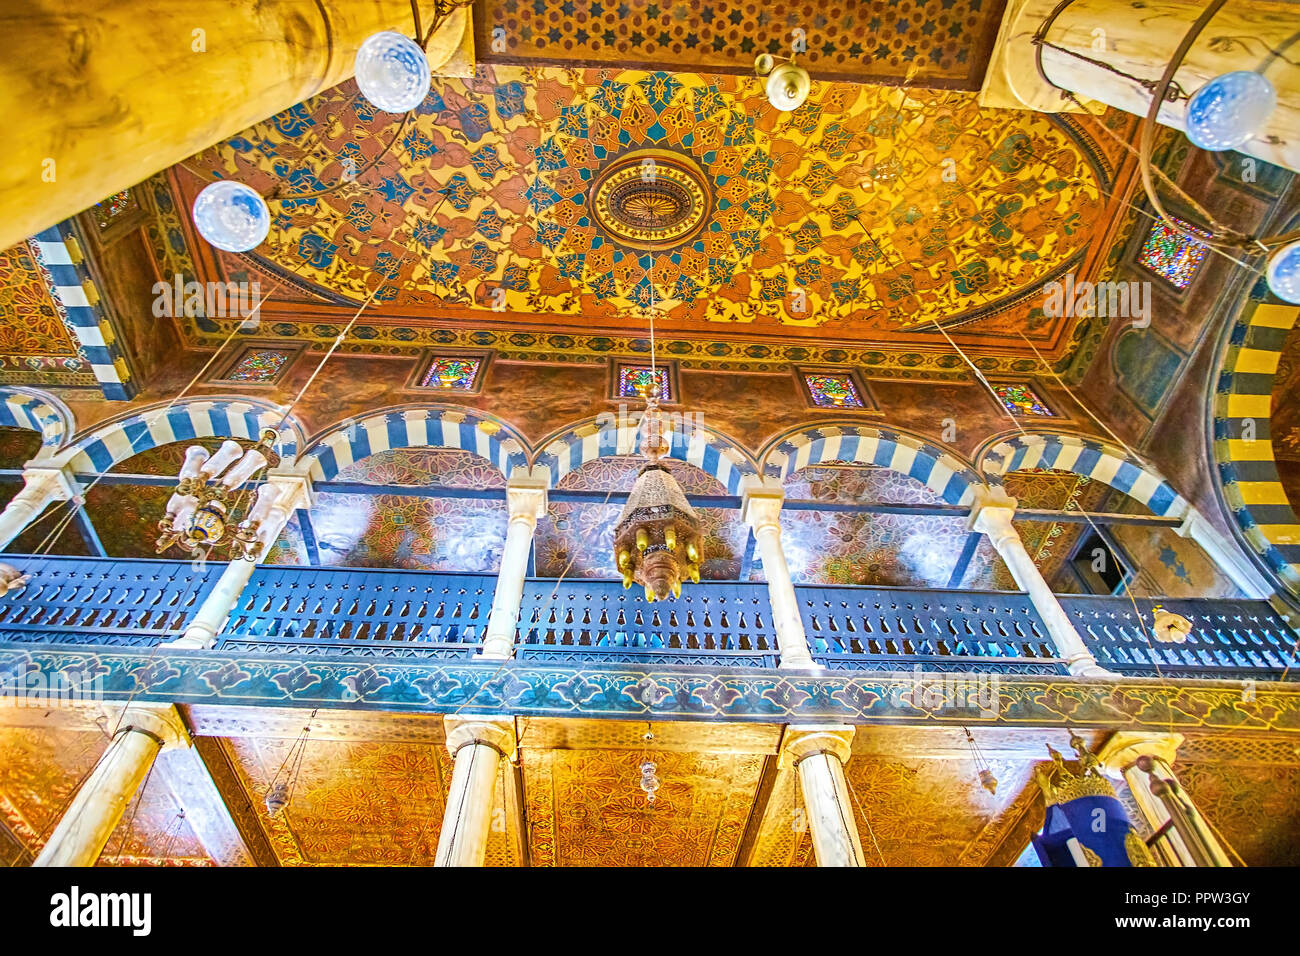 CAIRO, EGYPT - DECEMBER 23, 2017: The wooden ceiling of Ben Ezra Synagogue decorated with intricate patterns, and ottoman style arcades of the women p Stock Photo